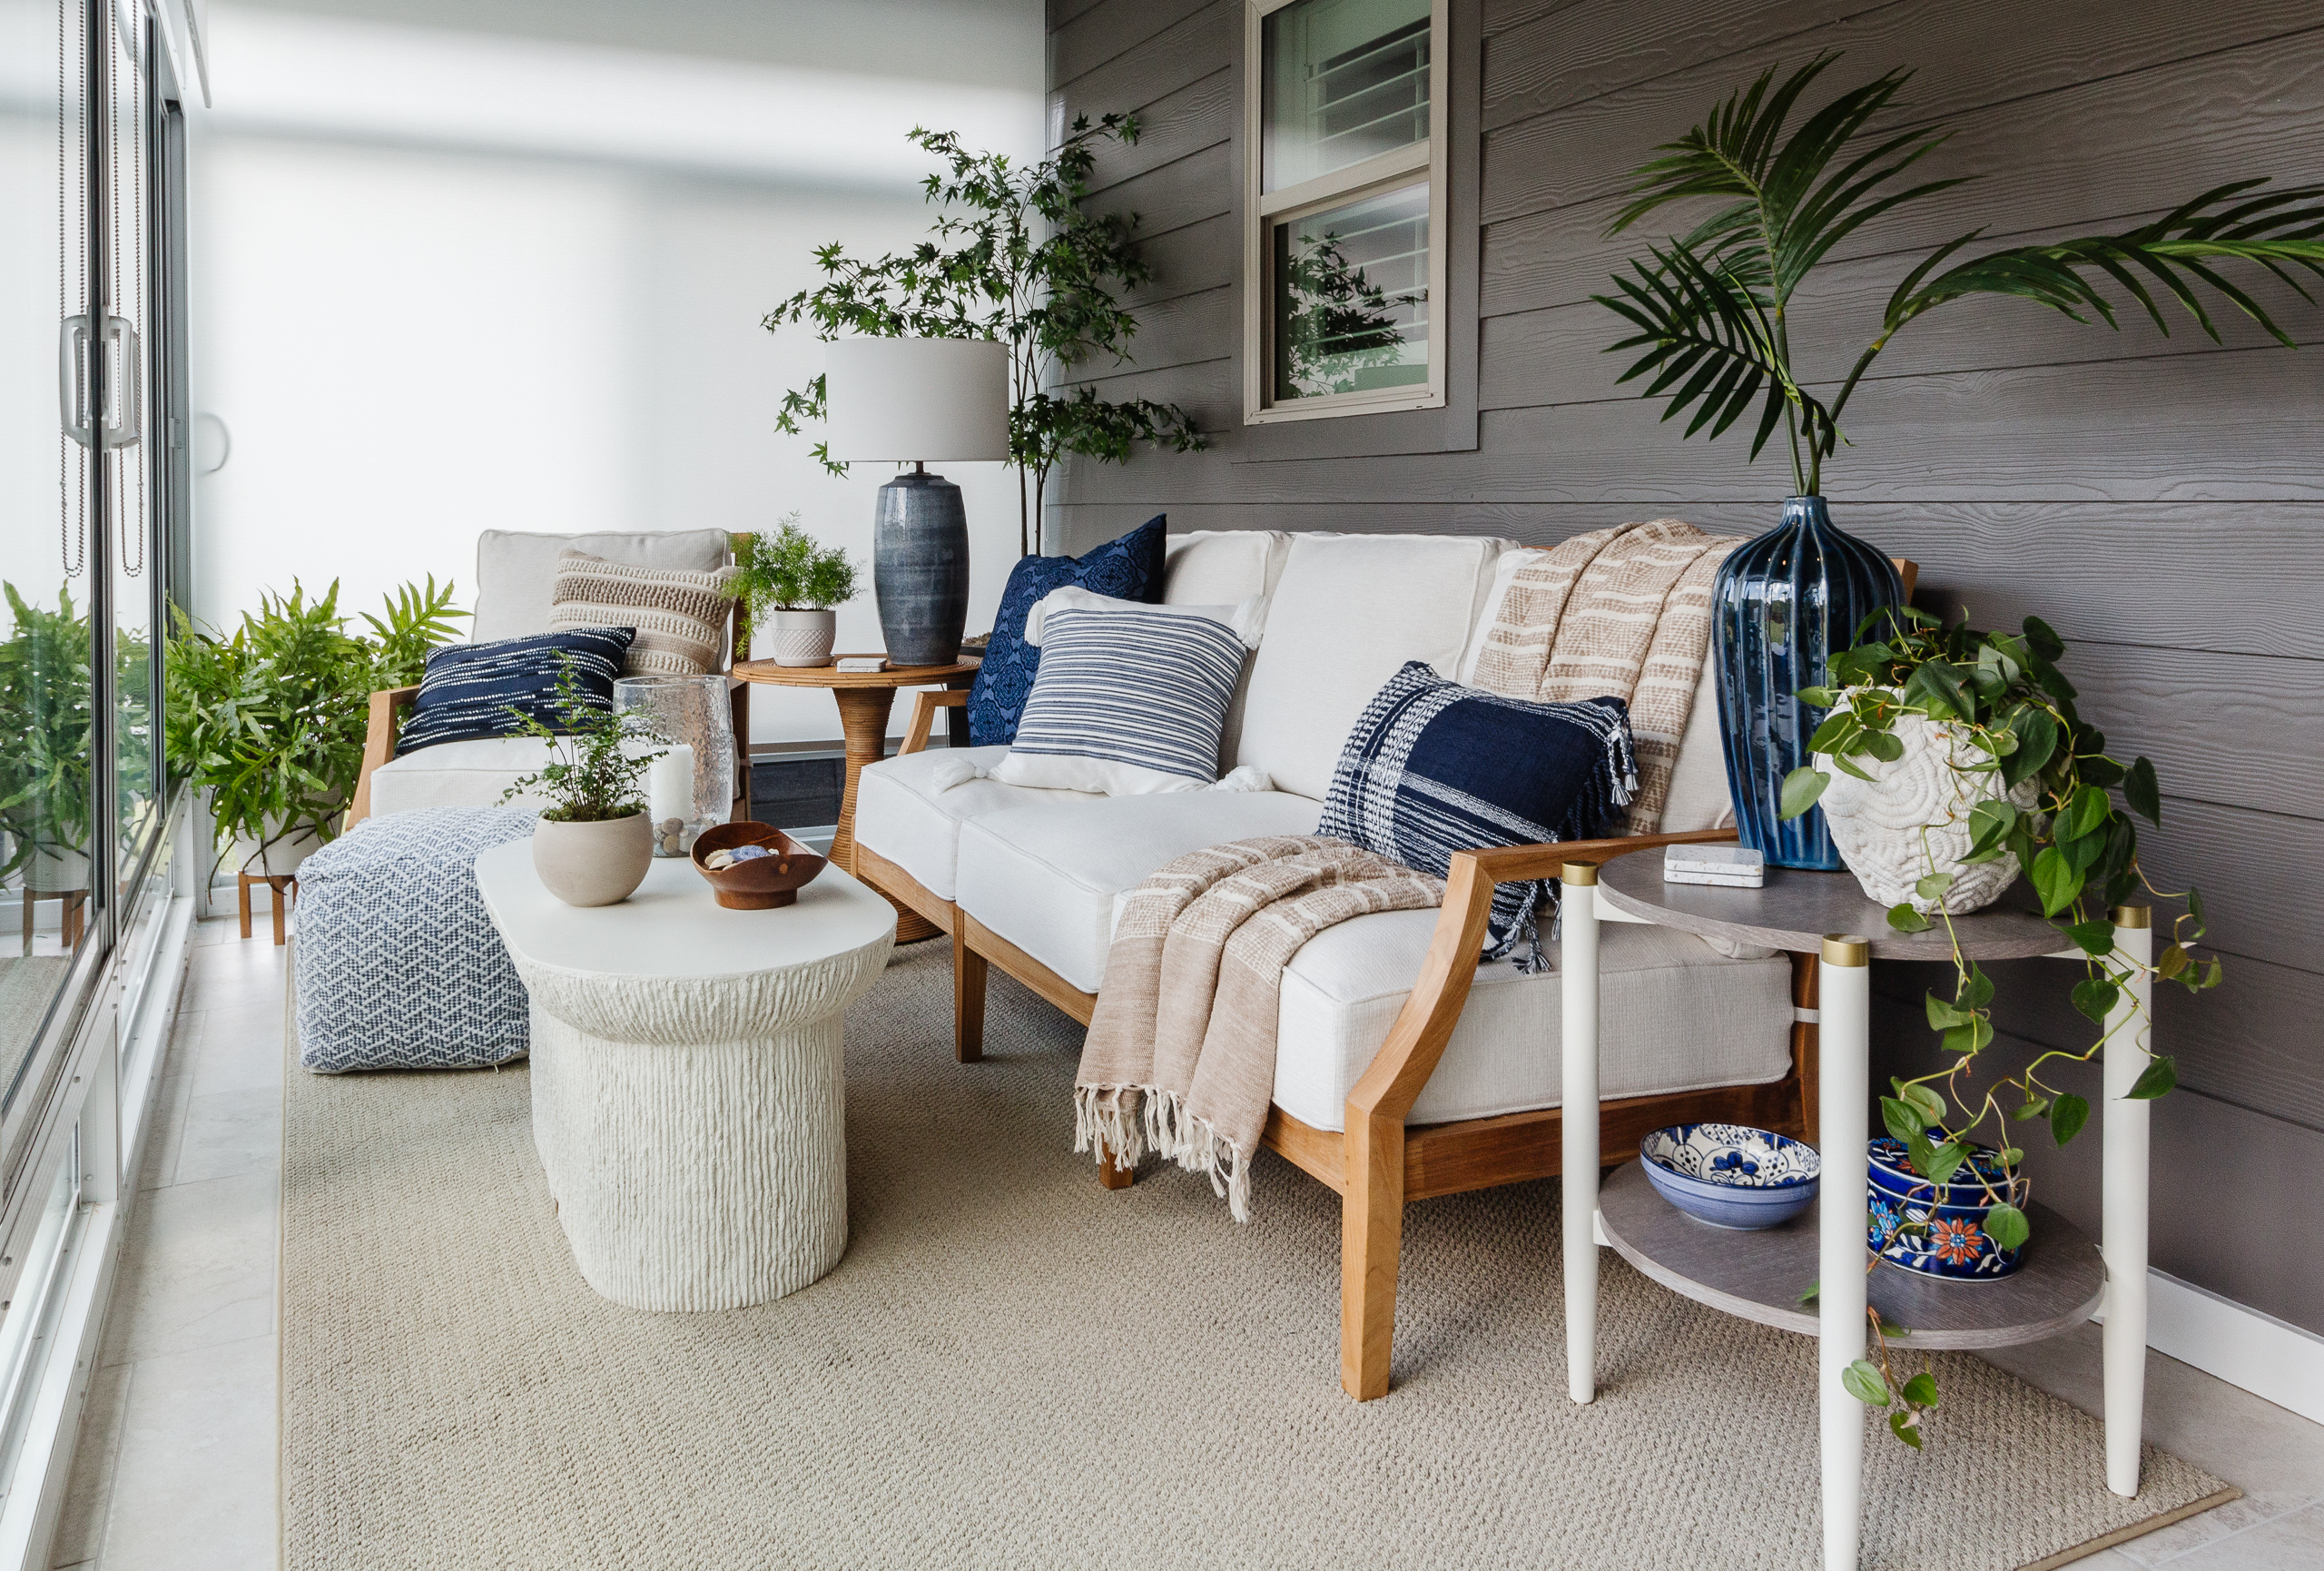 Sunroom blue and white accents with teak